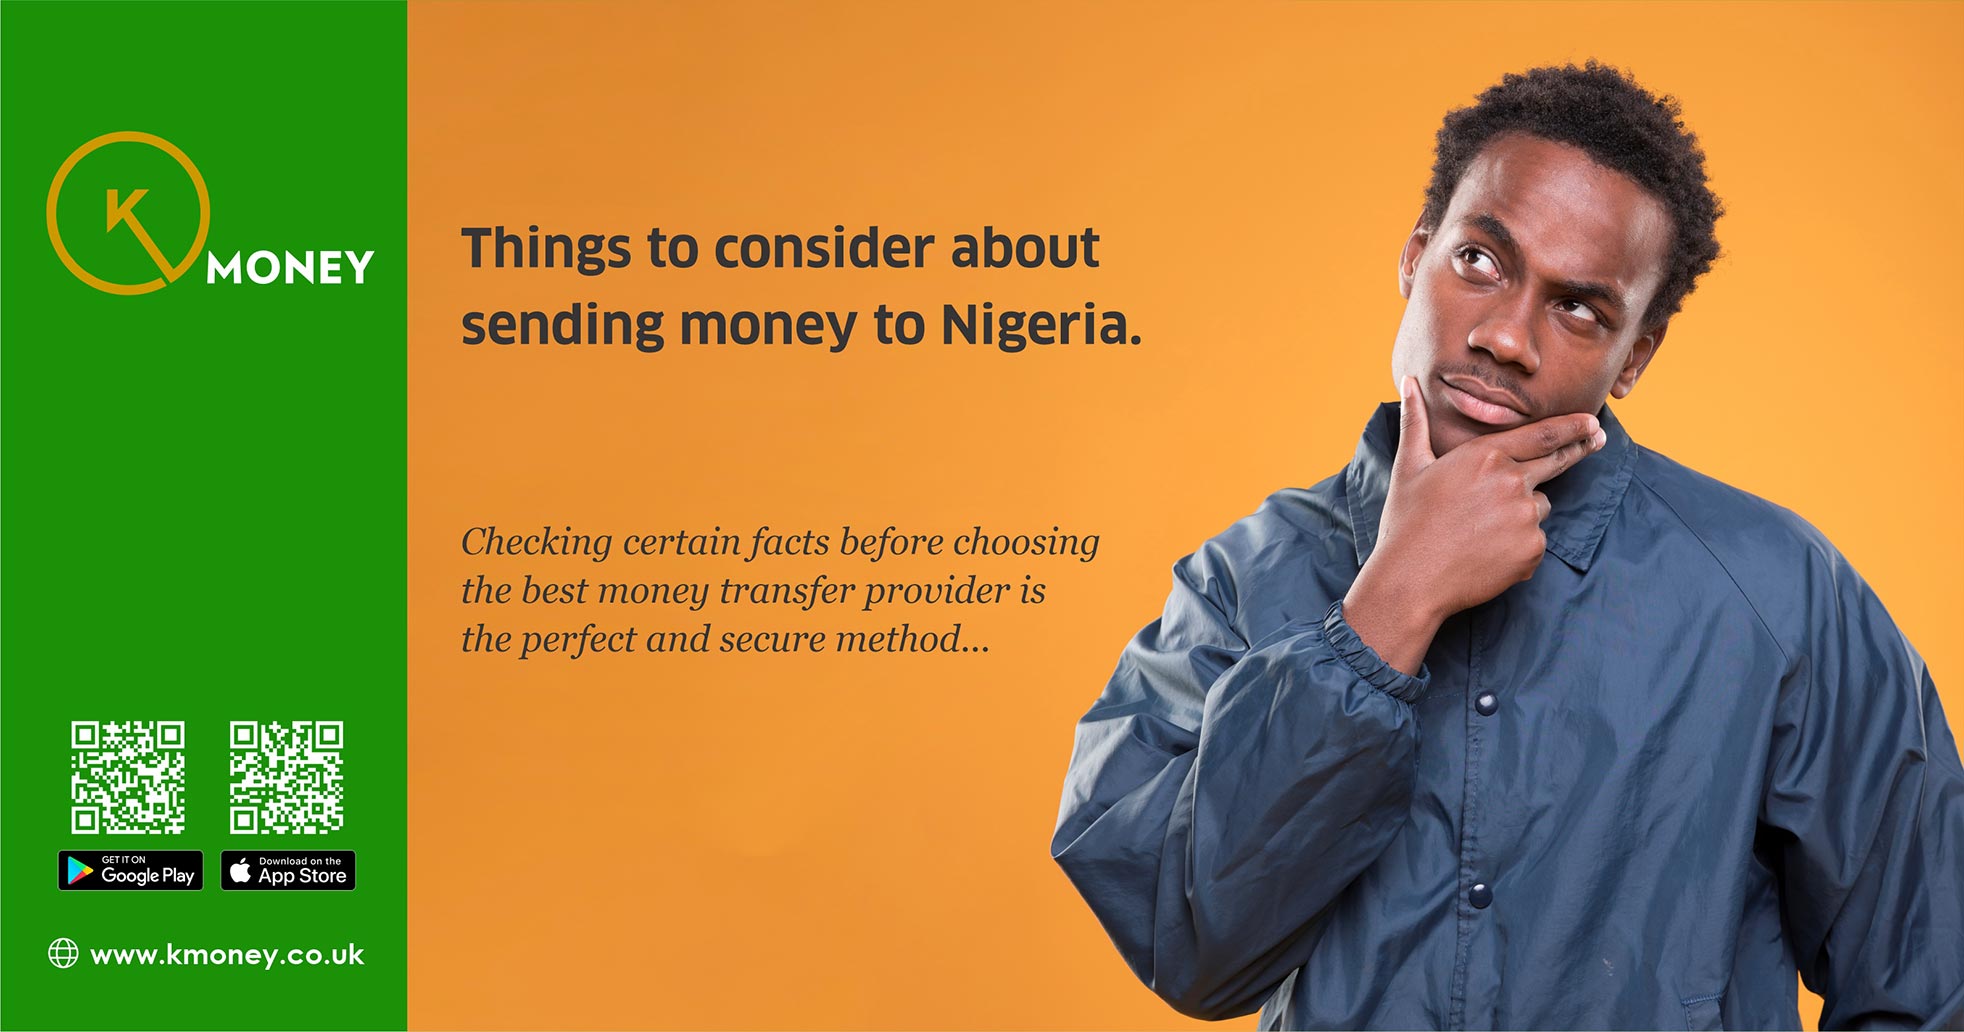 Things to consider about sending money to Nigeria